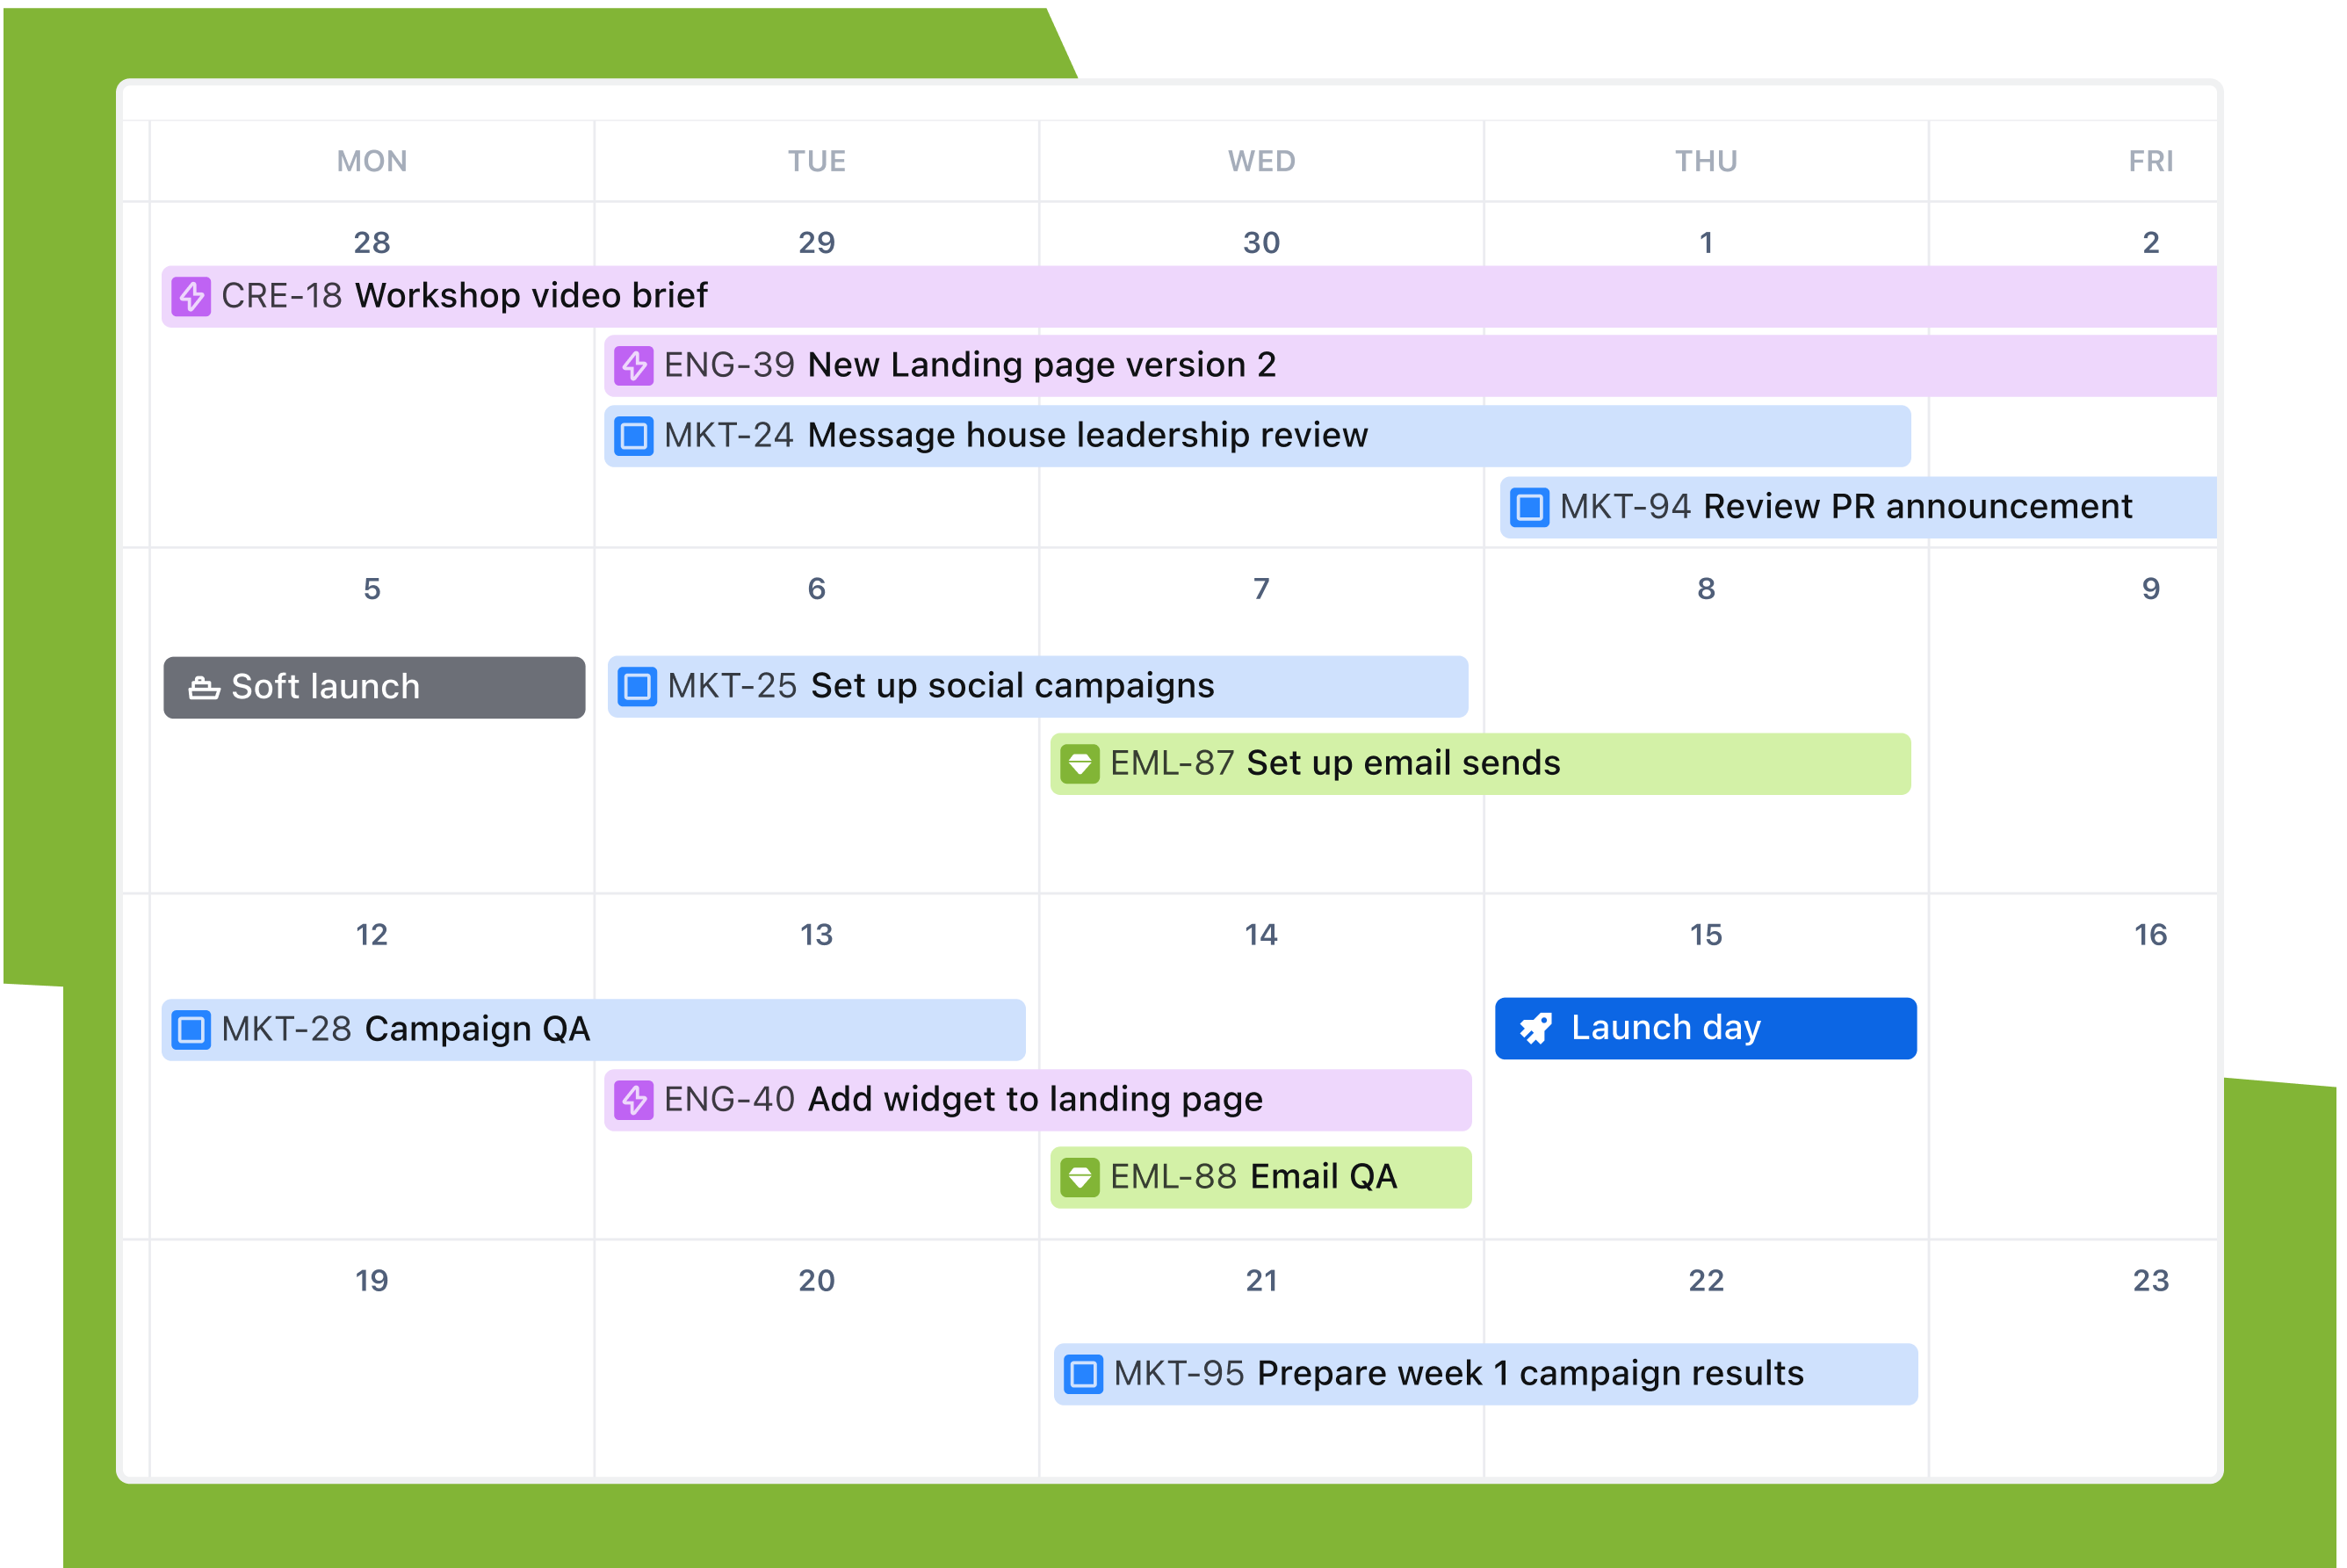 Calendar view of a Jira project depicting overlapping tasks from different teams to prepare for a Marketing launch.